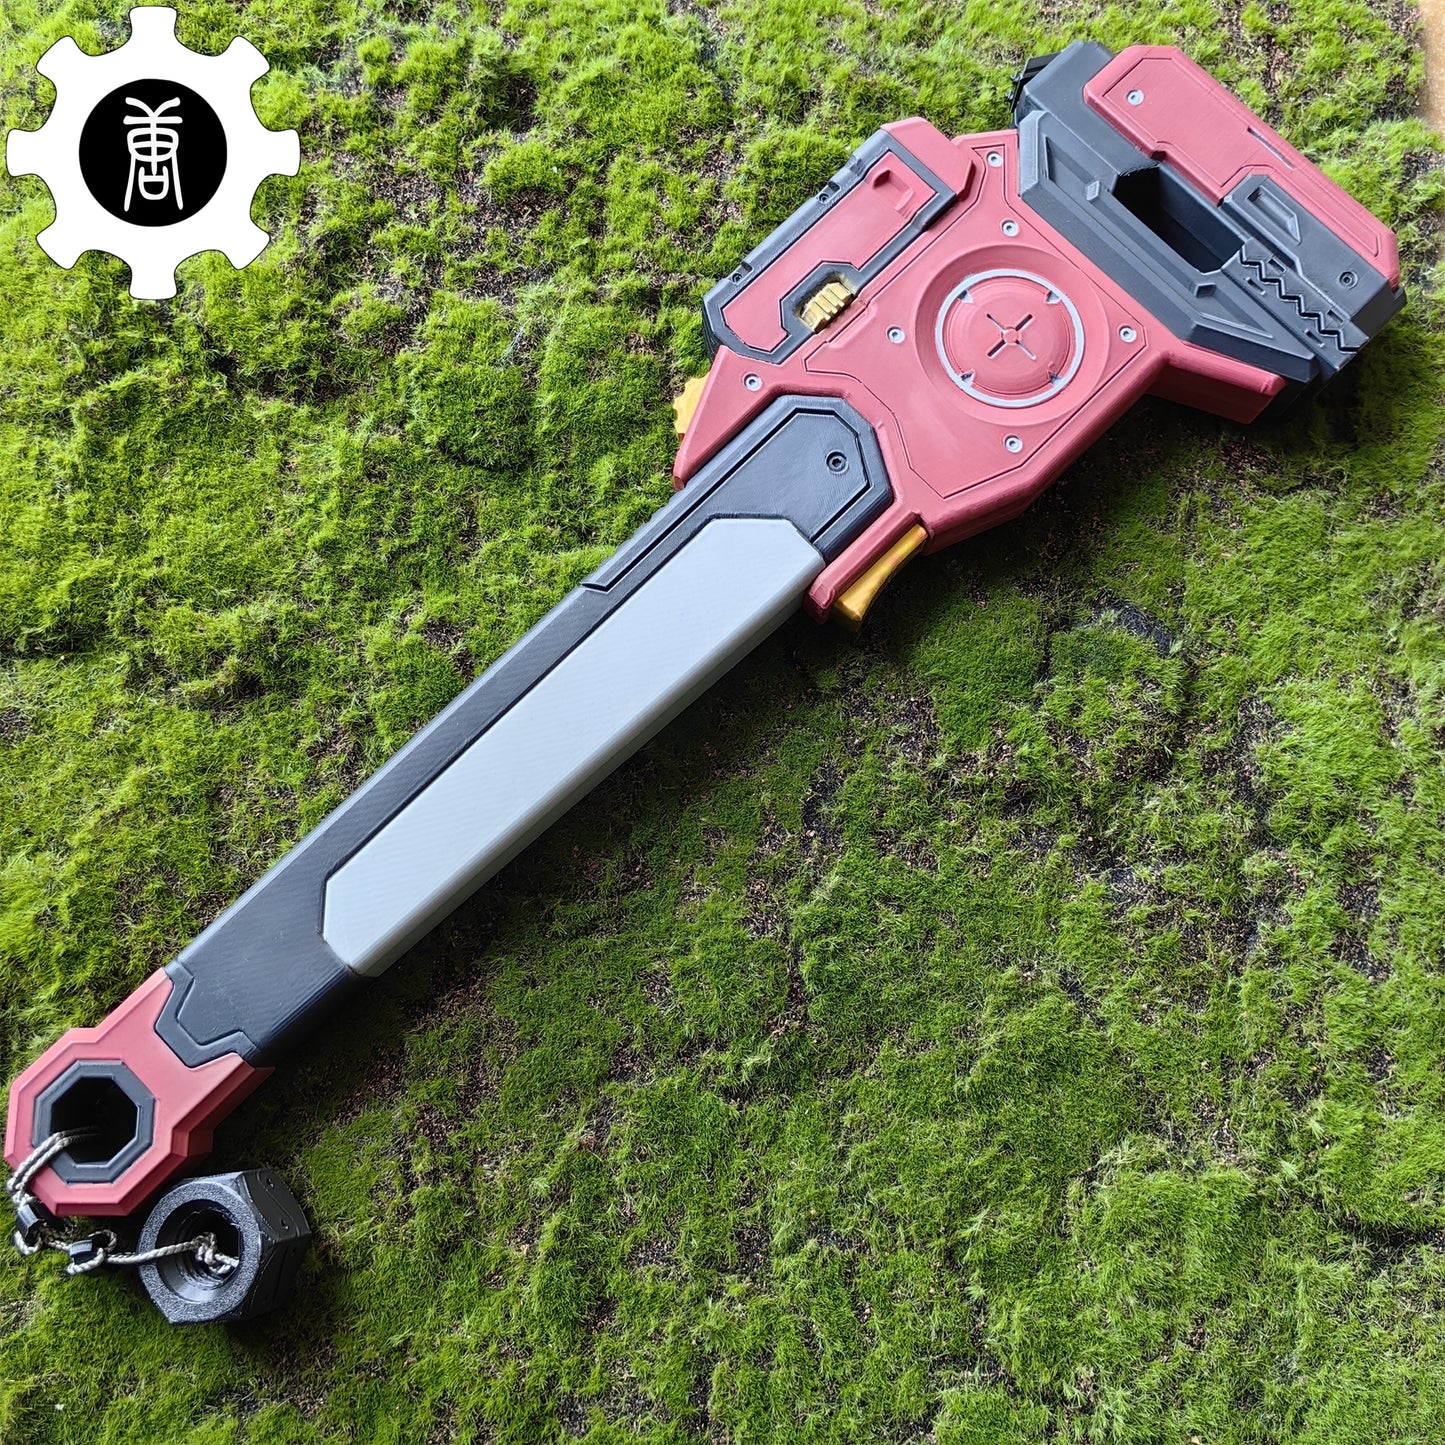 3D Printed Rampart Heirloom Problem Solver Wrench Battle